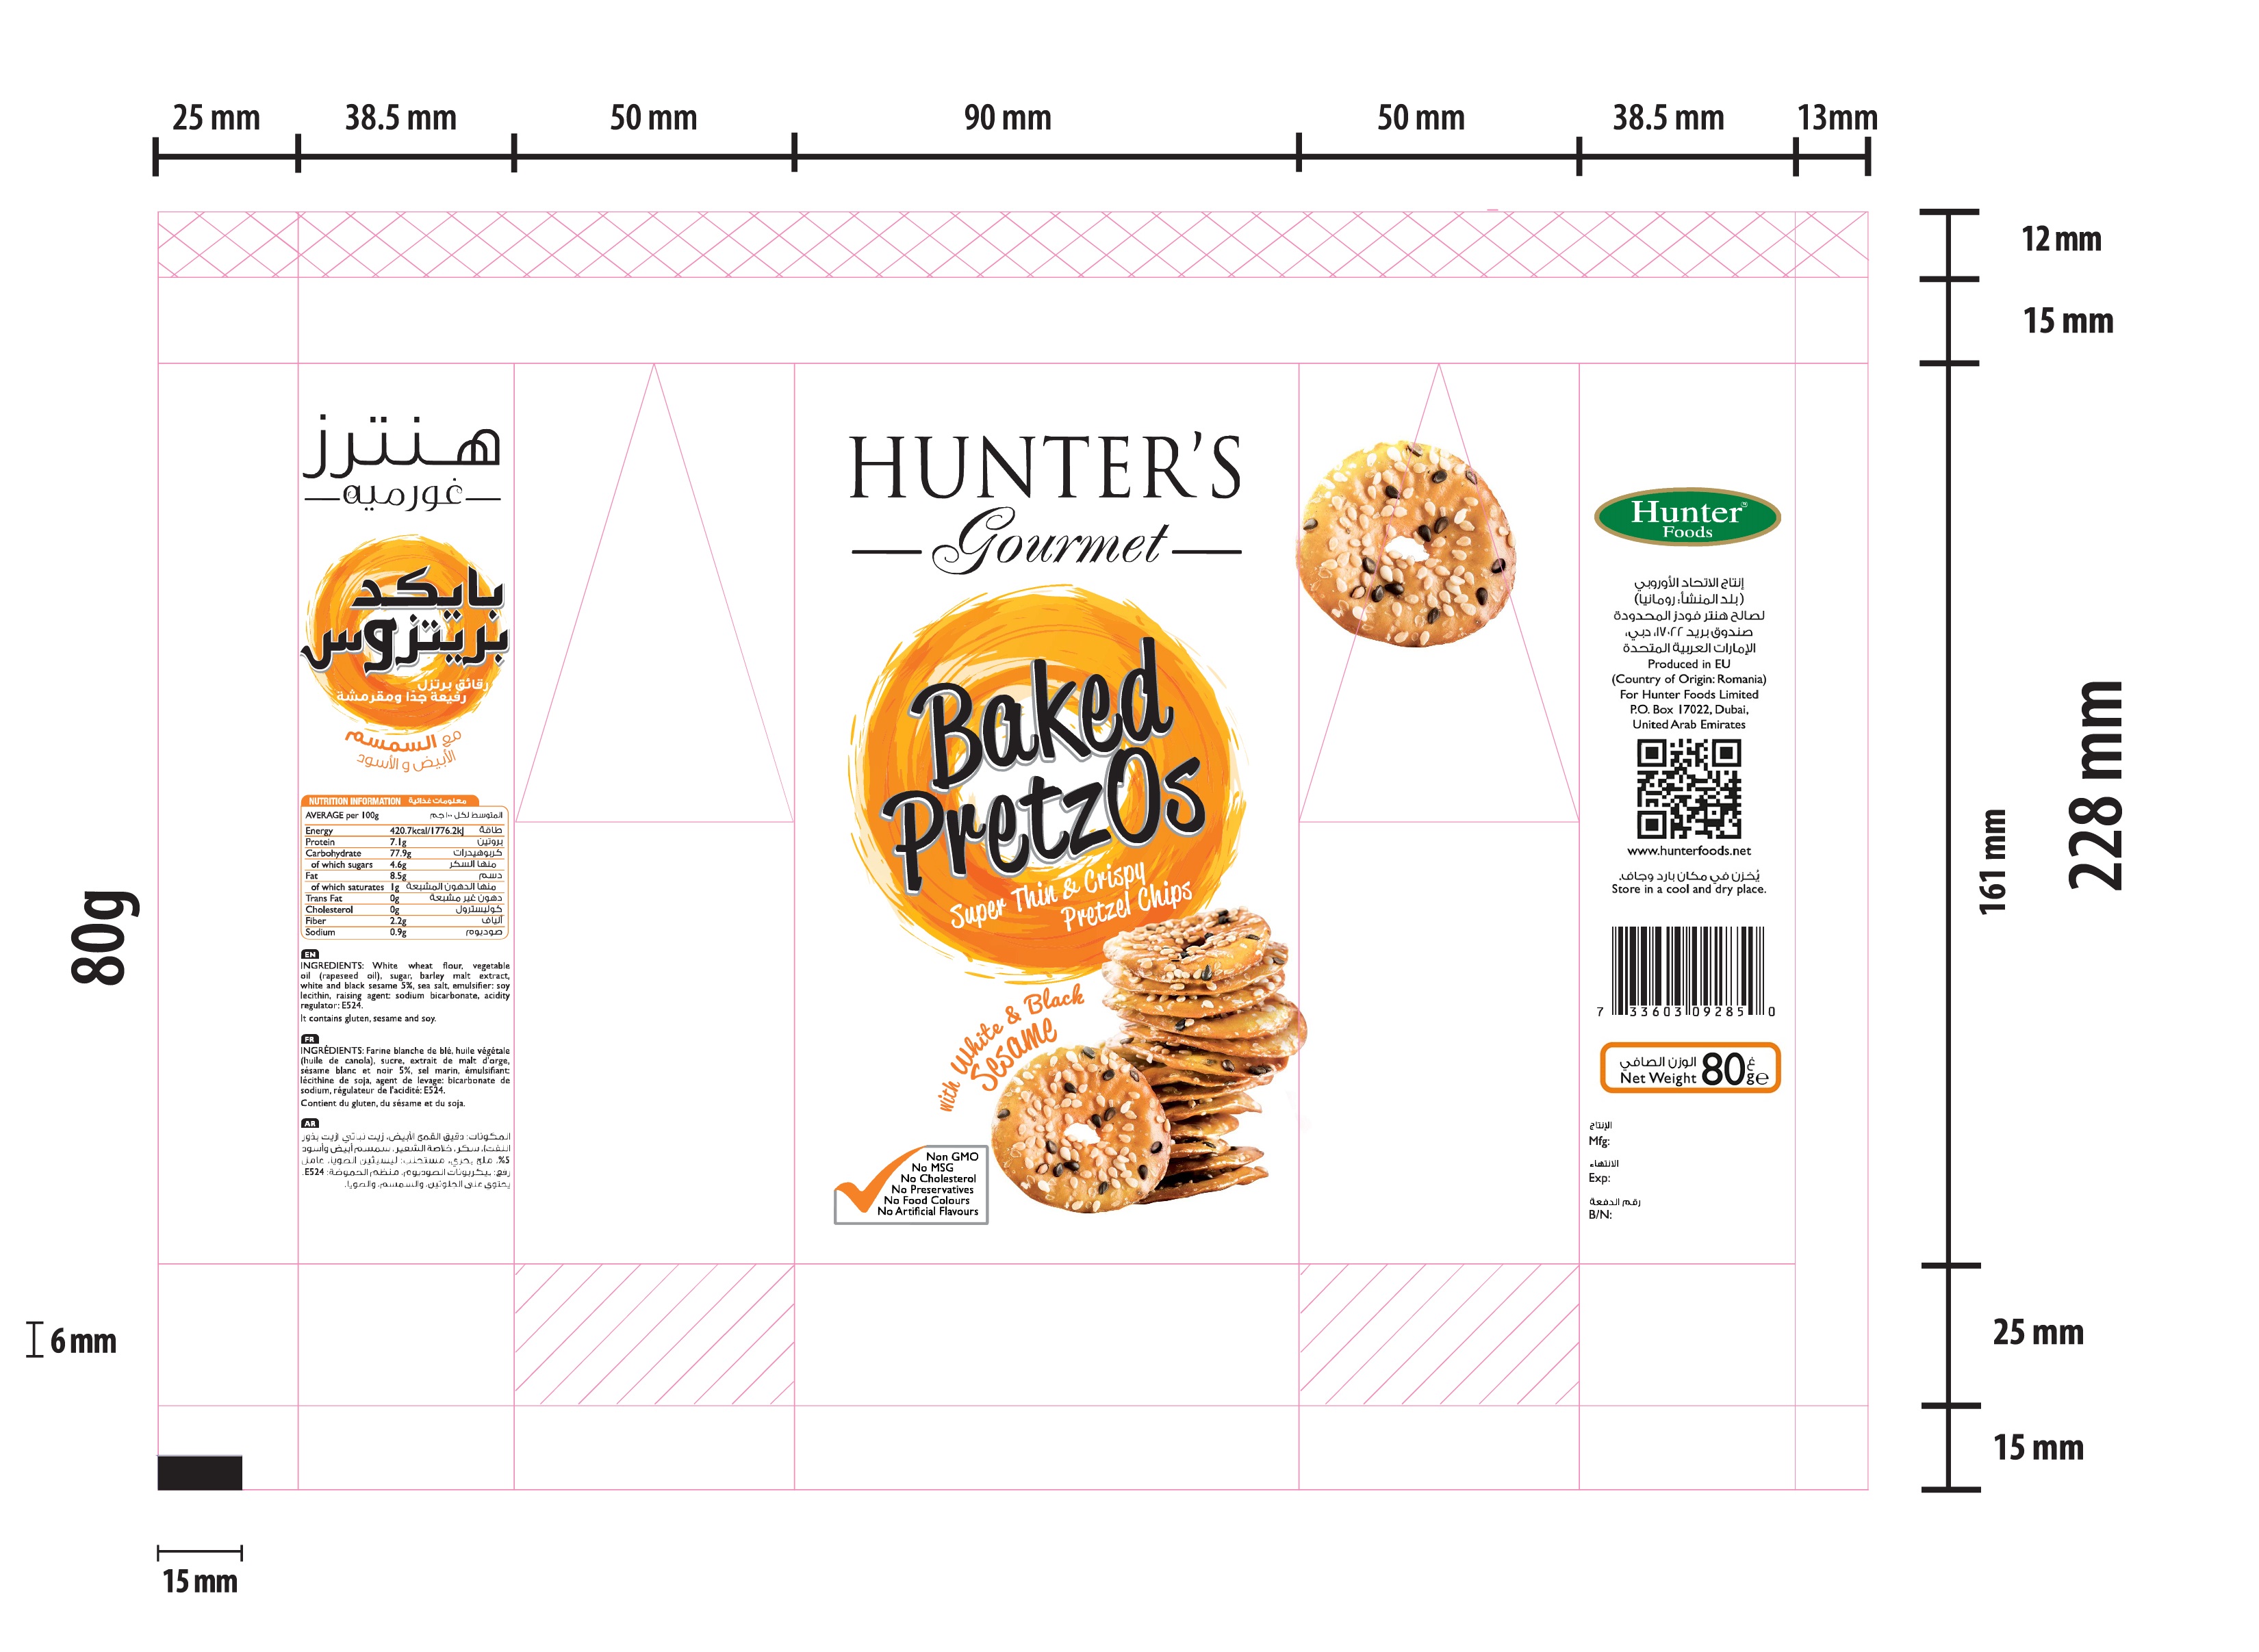 Hunter's Gourmet Baked Pretzos - with White & Black Sesame 20 units per case 80 g Product Label